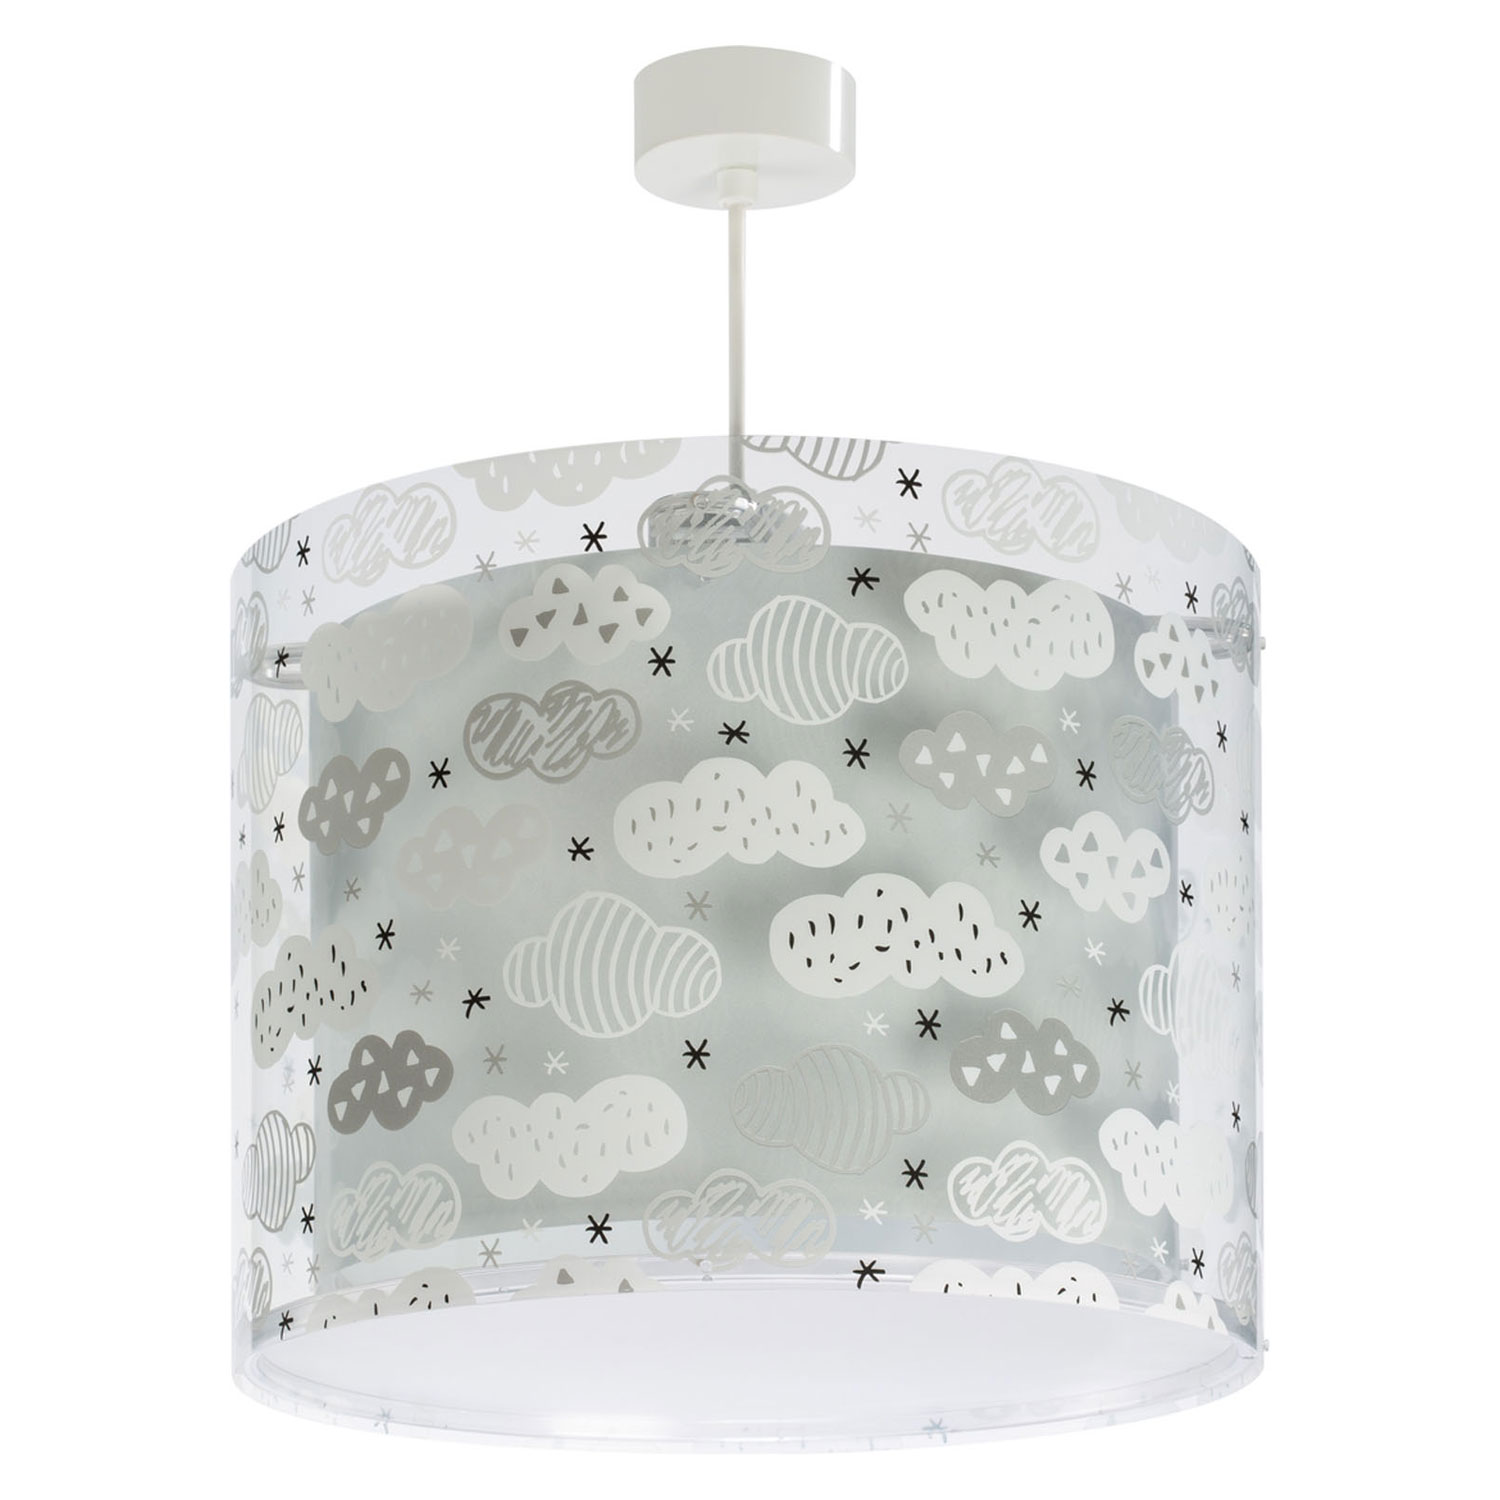 blozen Fjord oven Dalber Hanging Lamp Clouds Gray, 33cm | Thimble Toys